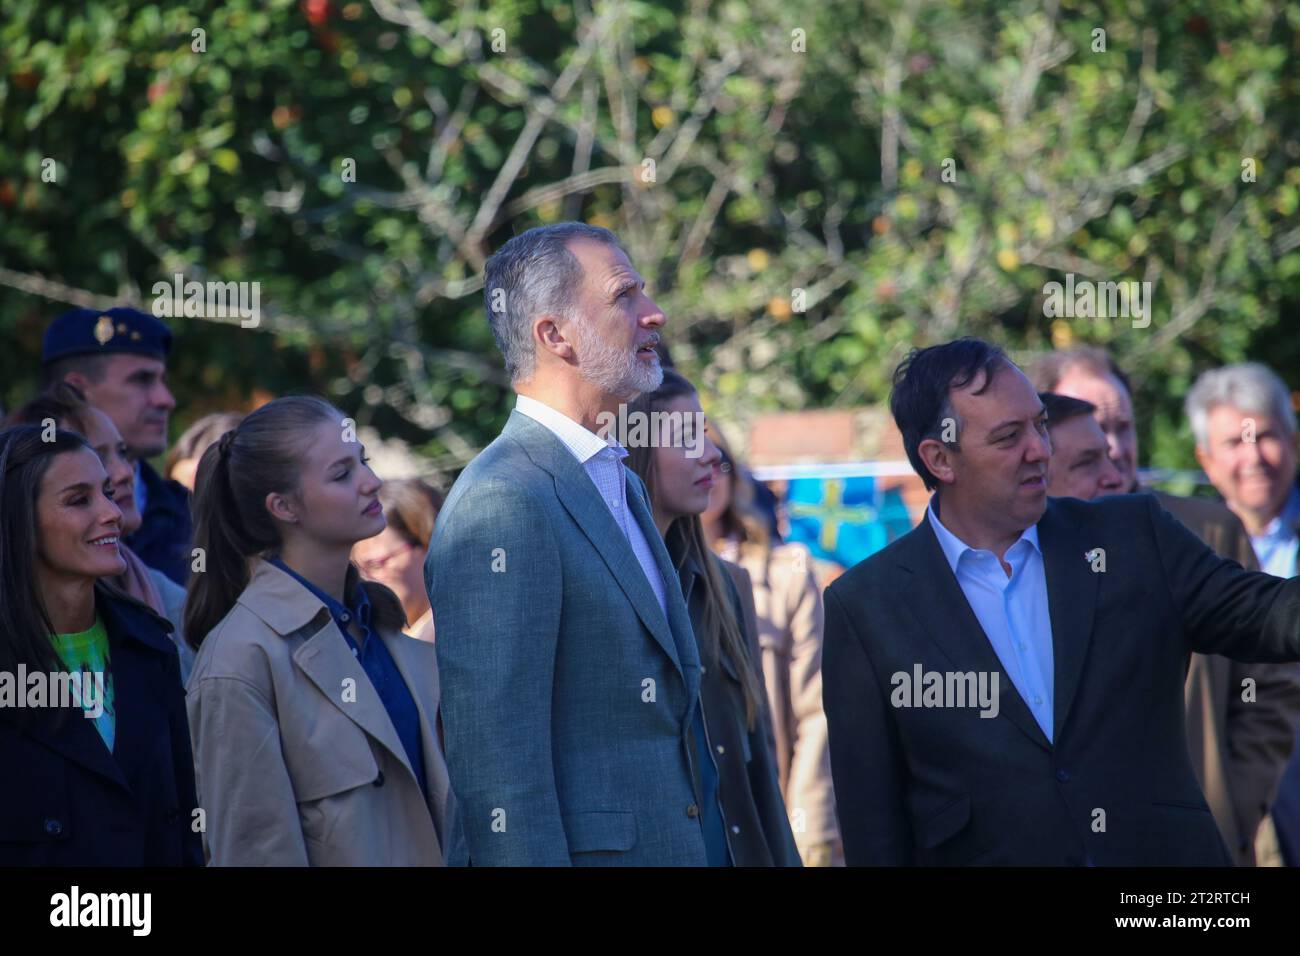 Arroes, Spain, 21st October 2023: King Felipe VI (L) attends the explanations of the Mayor of Villaviciosa, Alejandro Vega (R) during the Exemplary Town Award of Asturias 2023, on October 21, 2023, in Arroes, Spain . Credit: Alberto Brevers / Alamy Live News. Stock Photo